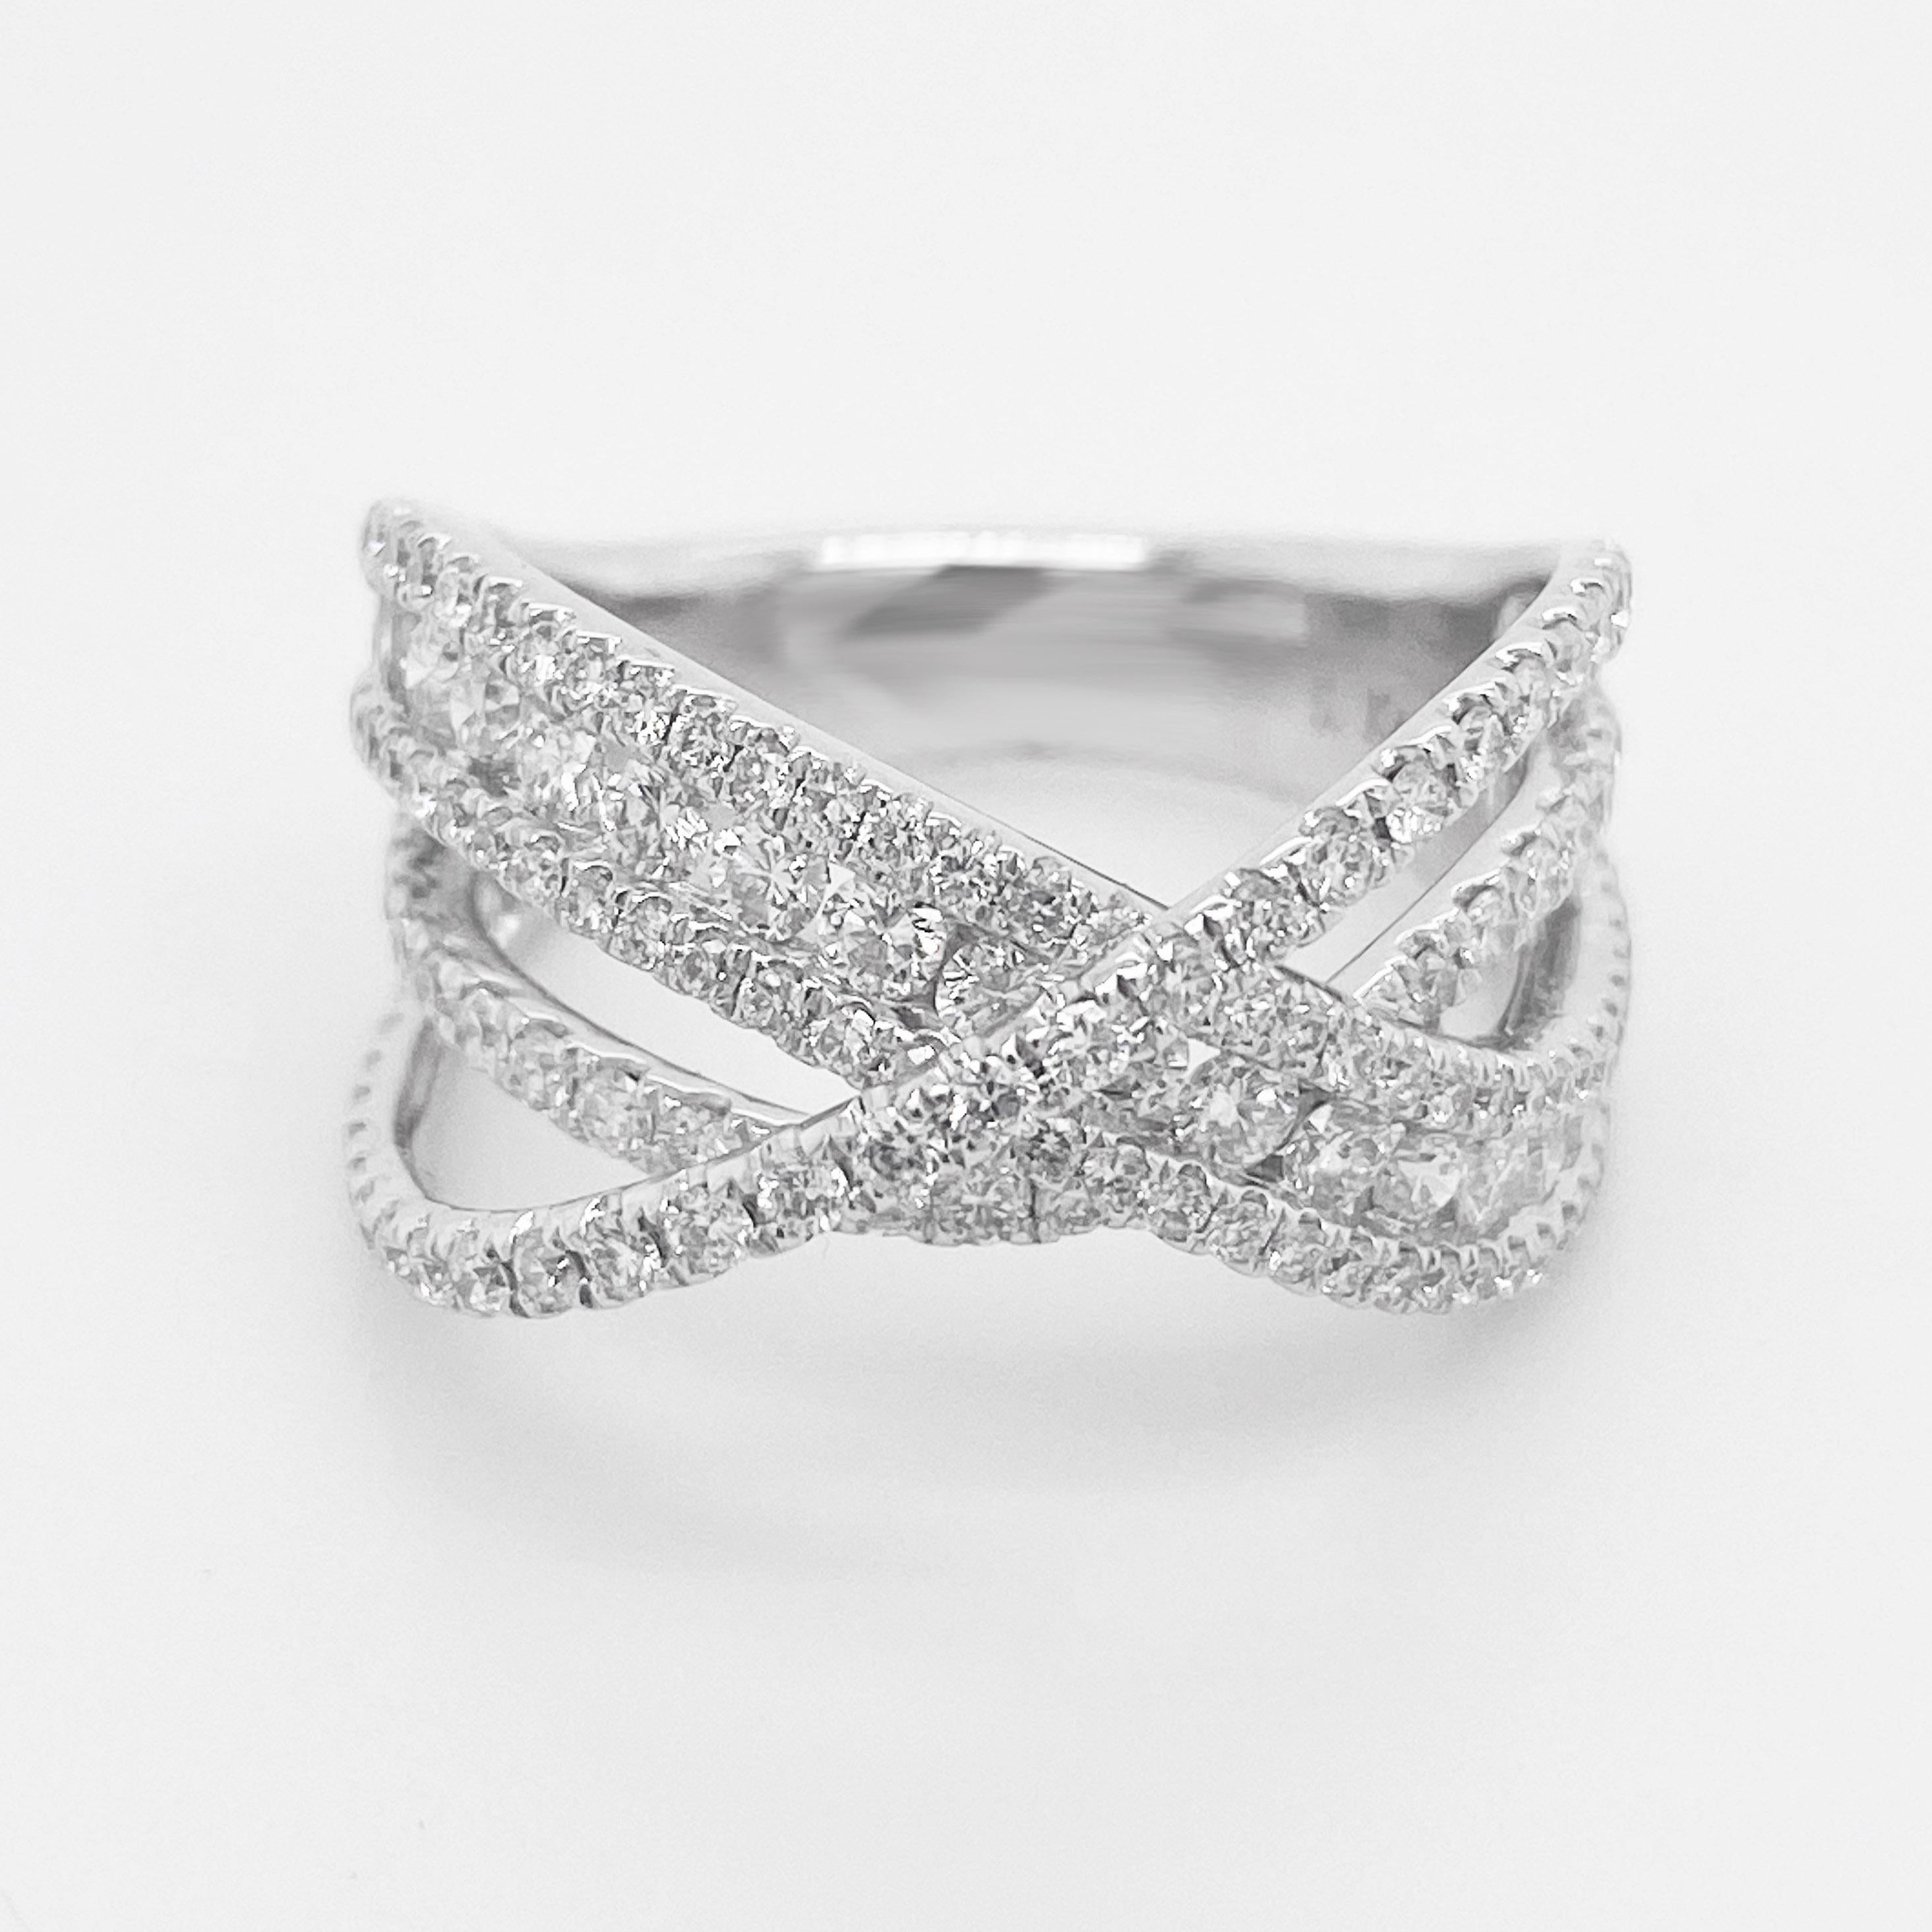 This X Diamond Ring is so Delightful!  The ribbons of diamonds and gold have three different levels that go diagonal across your finger.  The round brilliant cut diamonds sparkle from every direction!  The diamonds make the ribbon and there is very